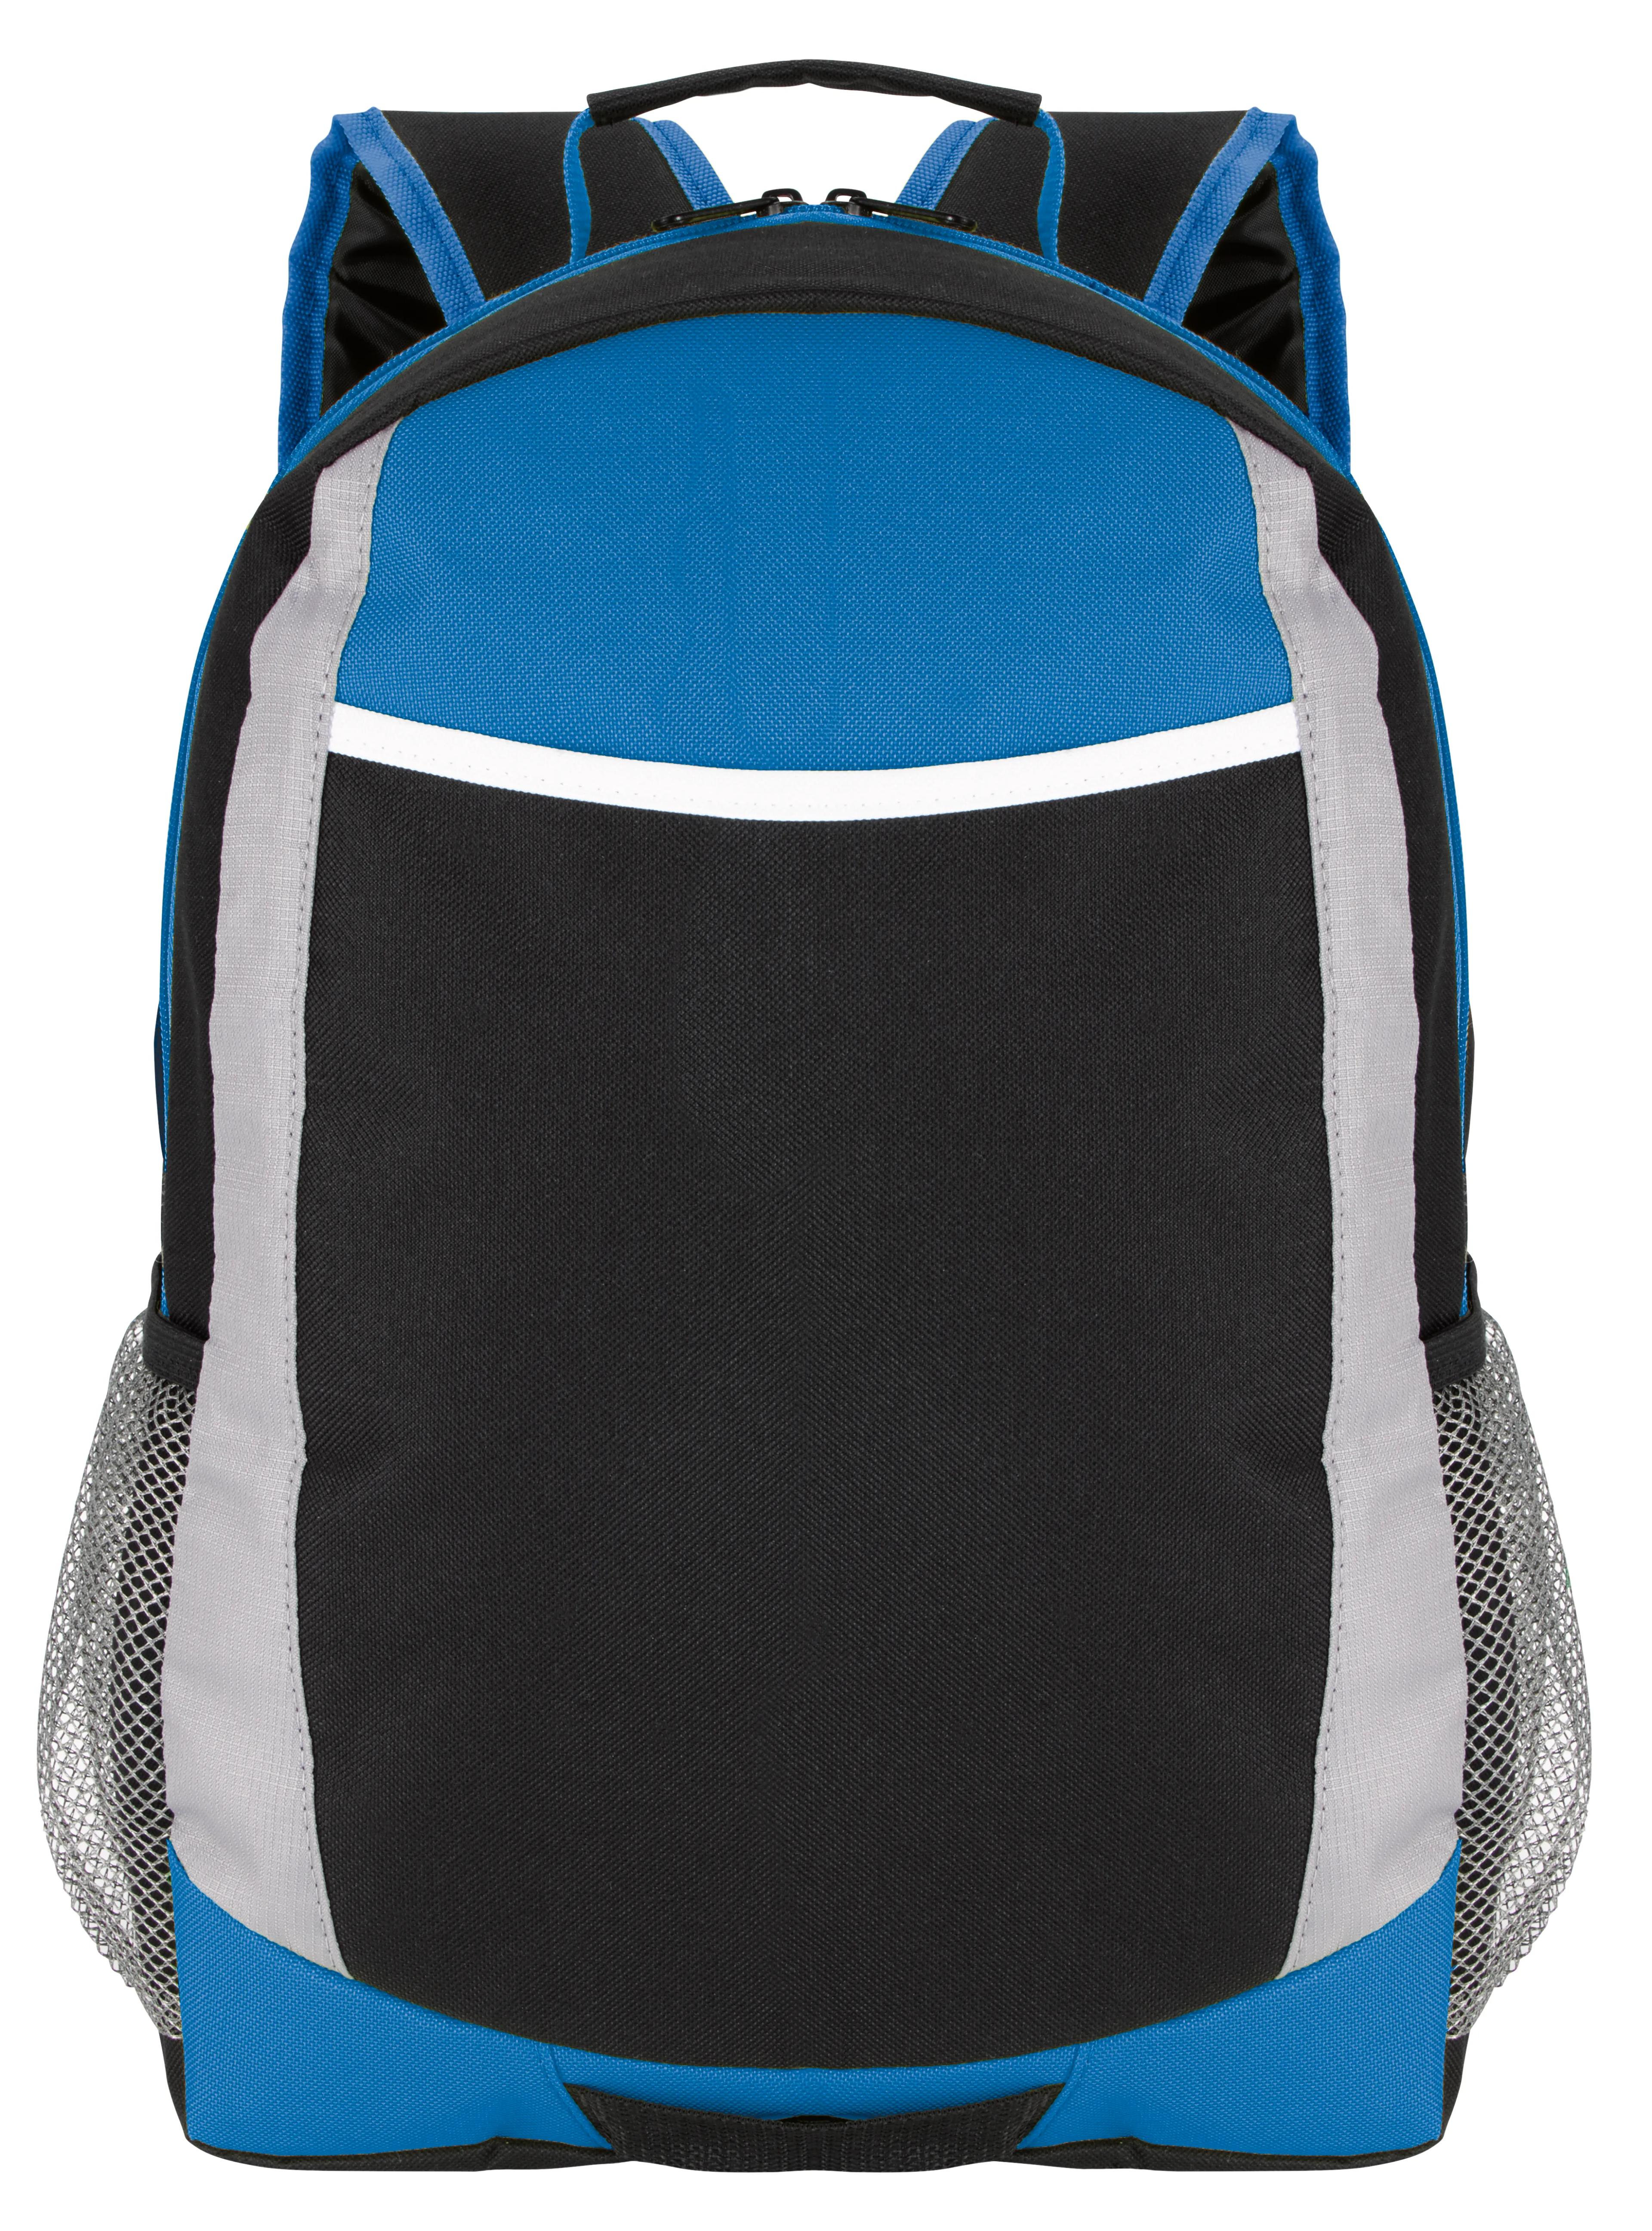 Primary Sport Backpack 3 of 14